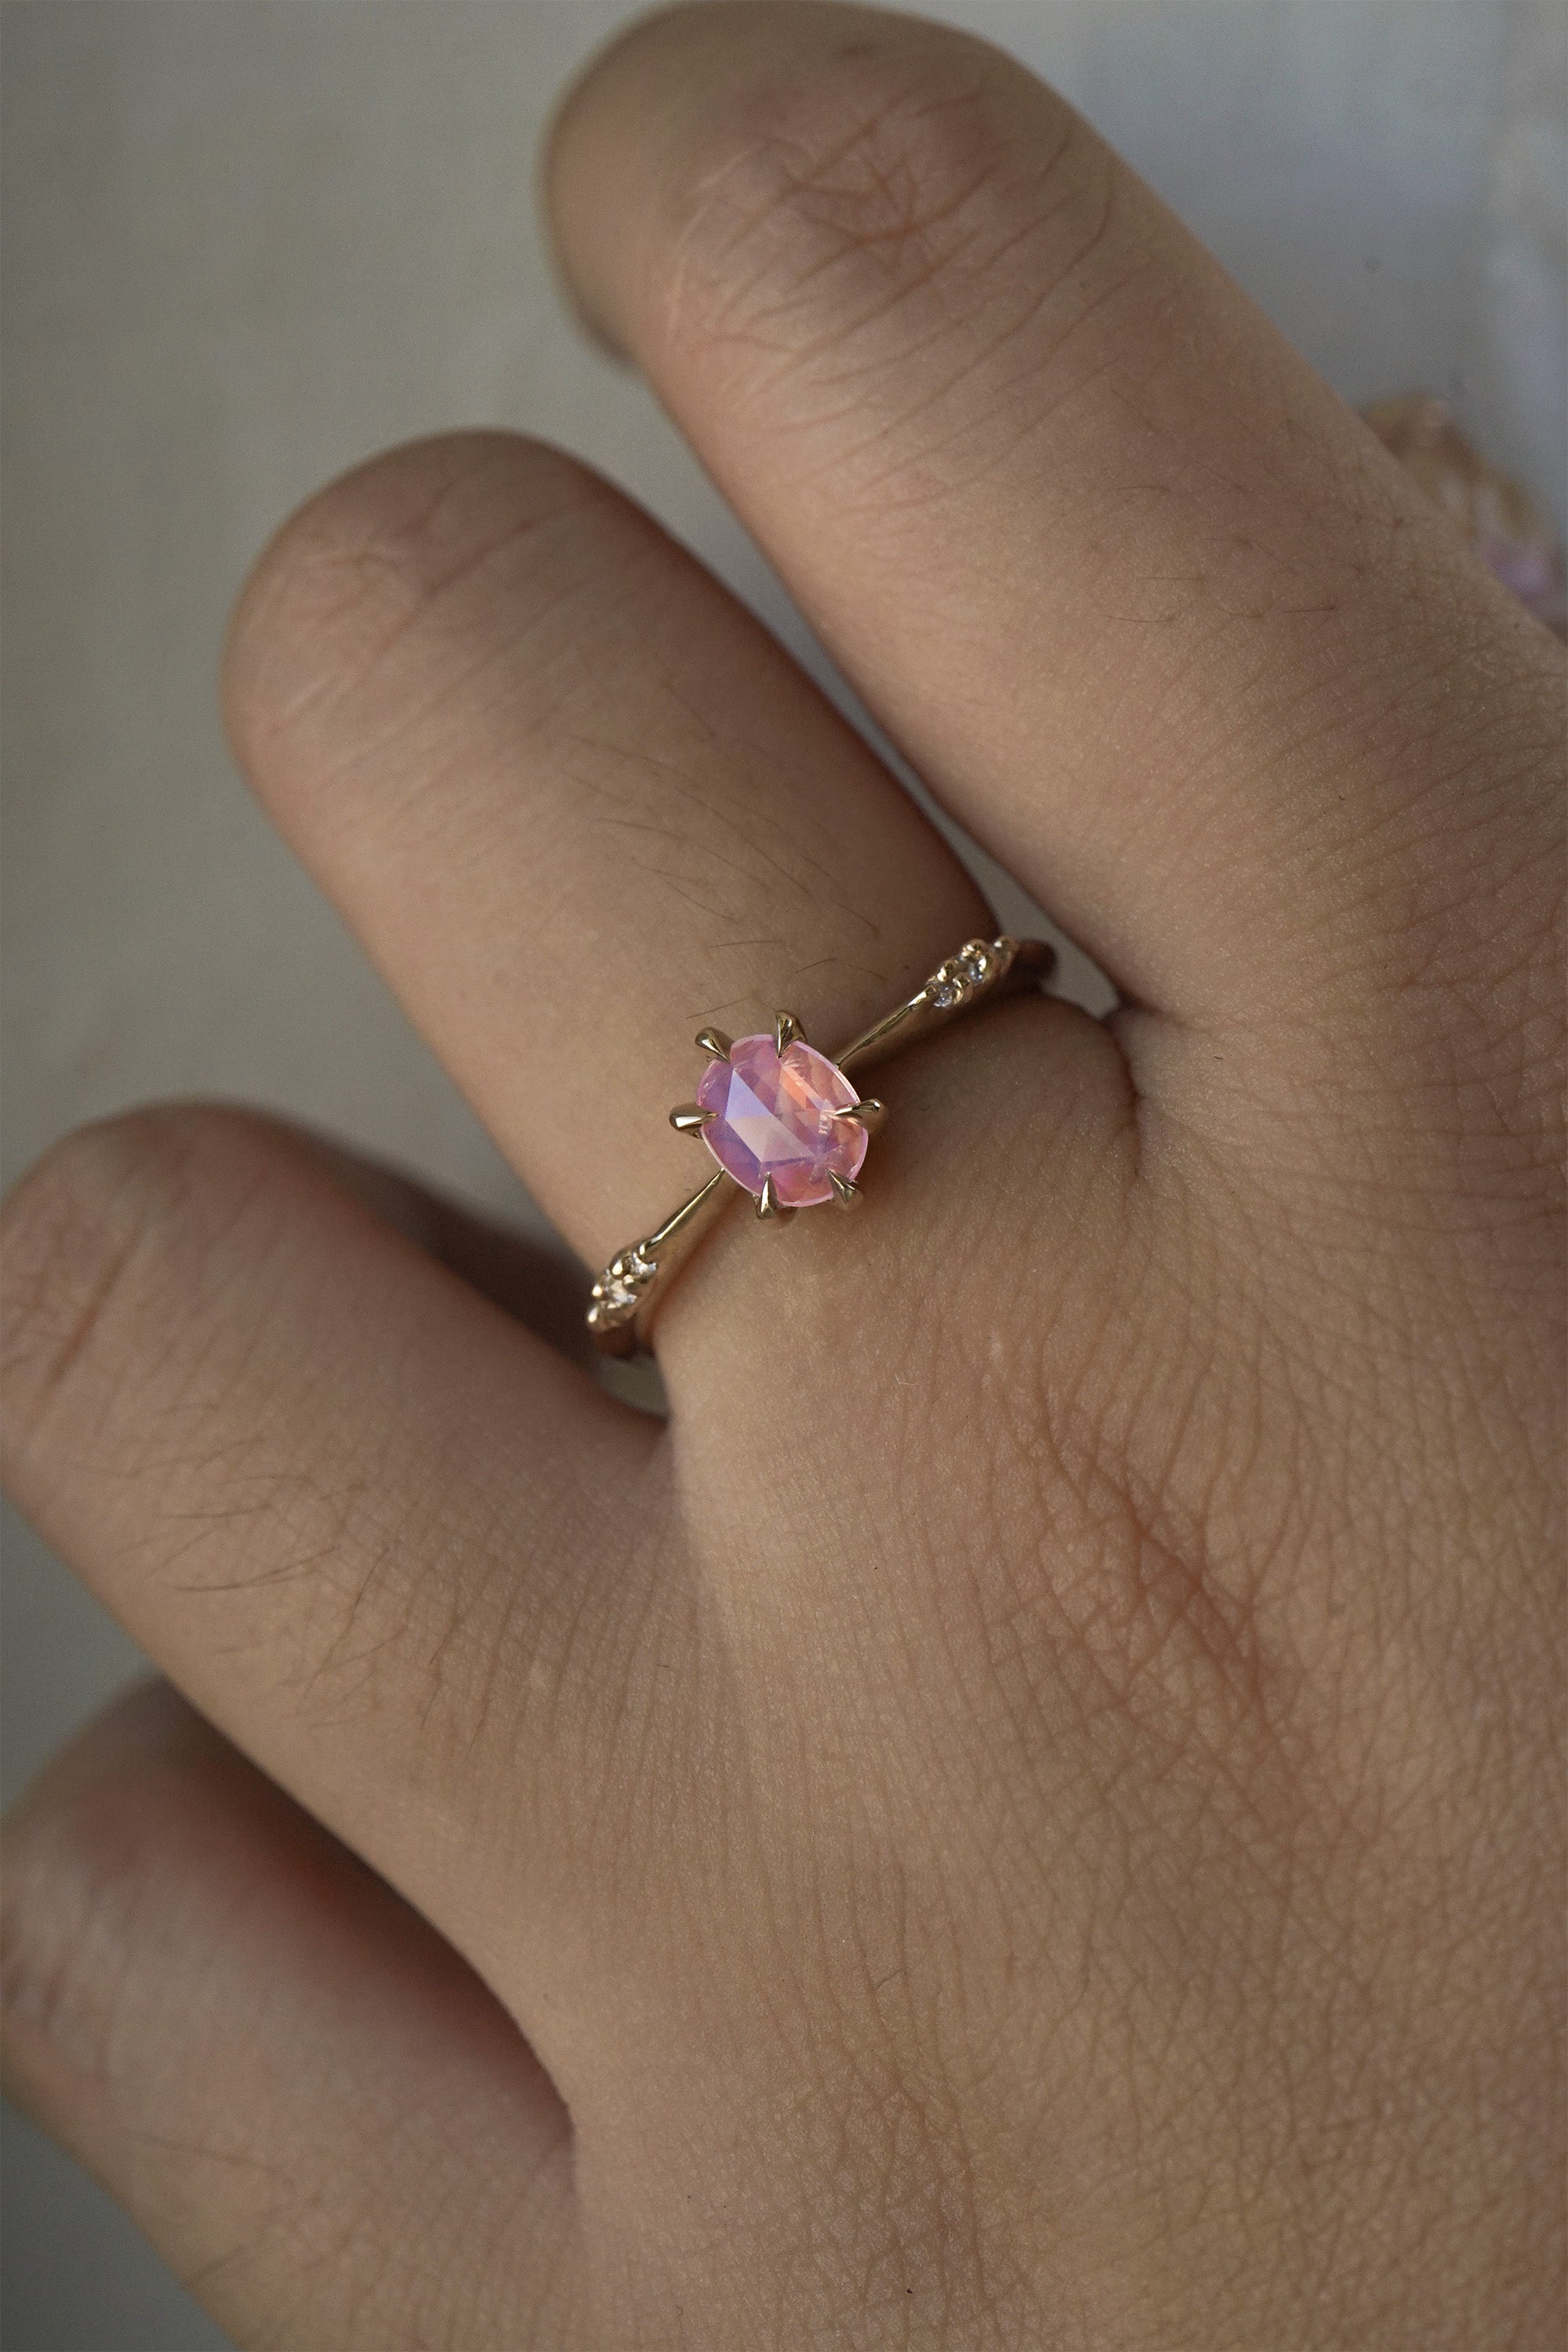 A delicate hand-carved one of a kind "Ilona" style engagement ring by Laurie Fleming Jewellery. The ring features a silky and opalescent rose cut oval pink sapphire centre, a tapered knife-edge band, and small diamond accents on the band shoulders. The ring is worn on a hand against a light grey background.